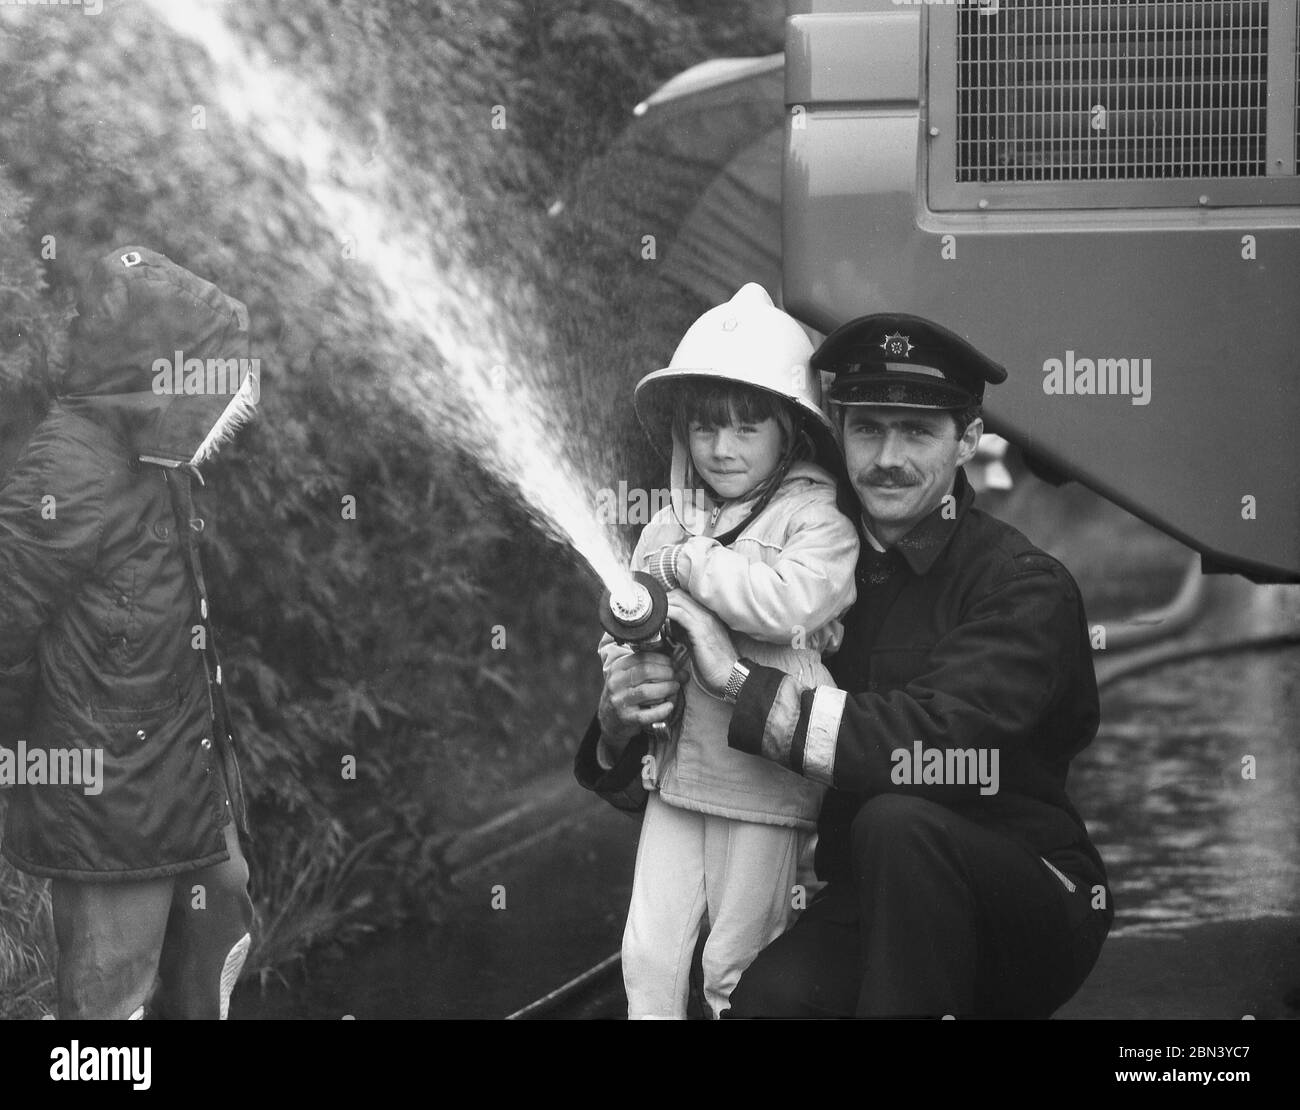 1980s, held by a uniformed fireman and watched by her brother, a little girl wearing a pointed fire helmet of the era, using a powerful water hose, at a fire service open day, England, UK. Stock Photo